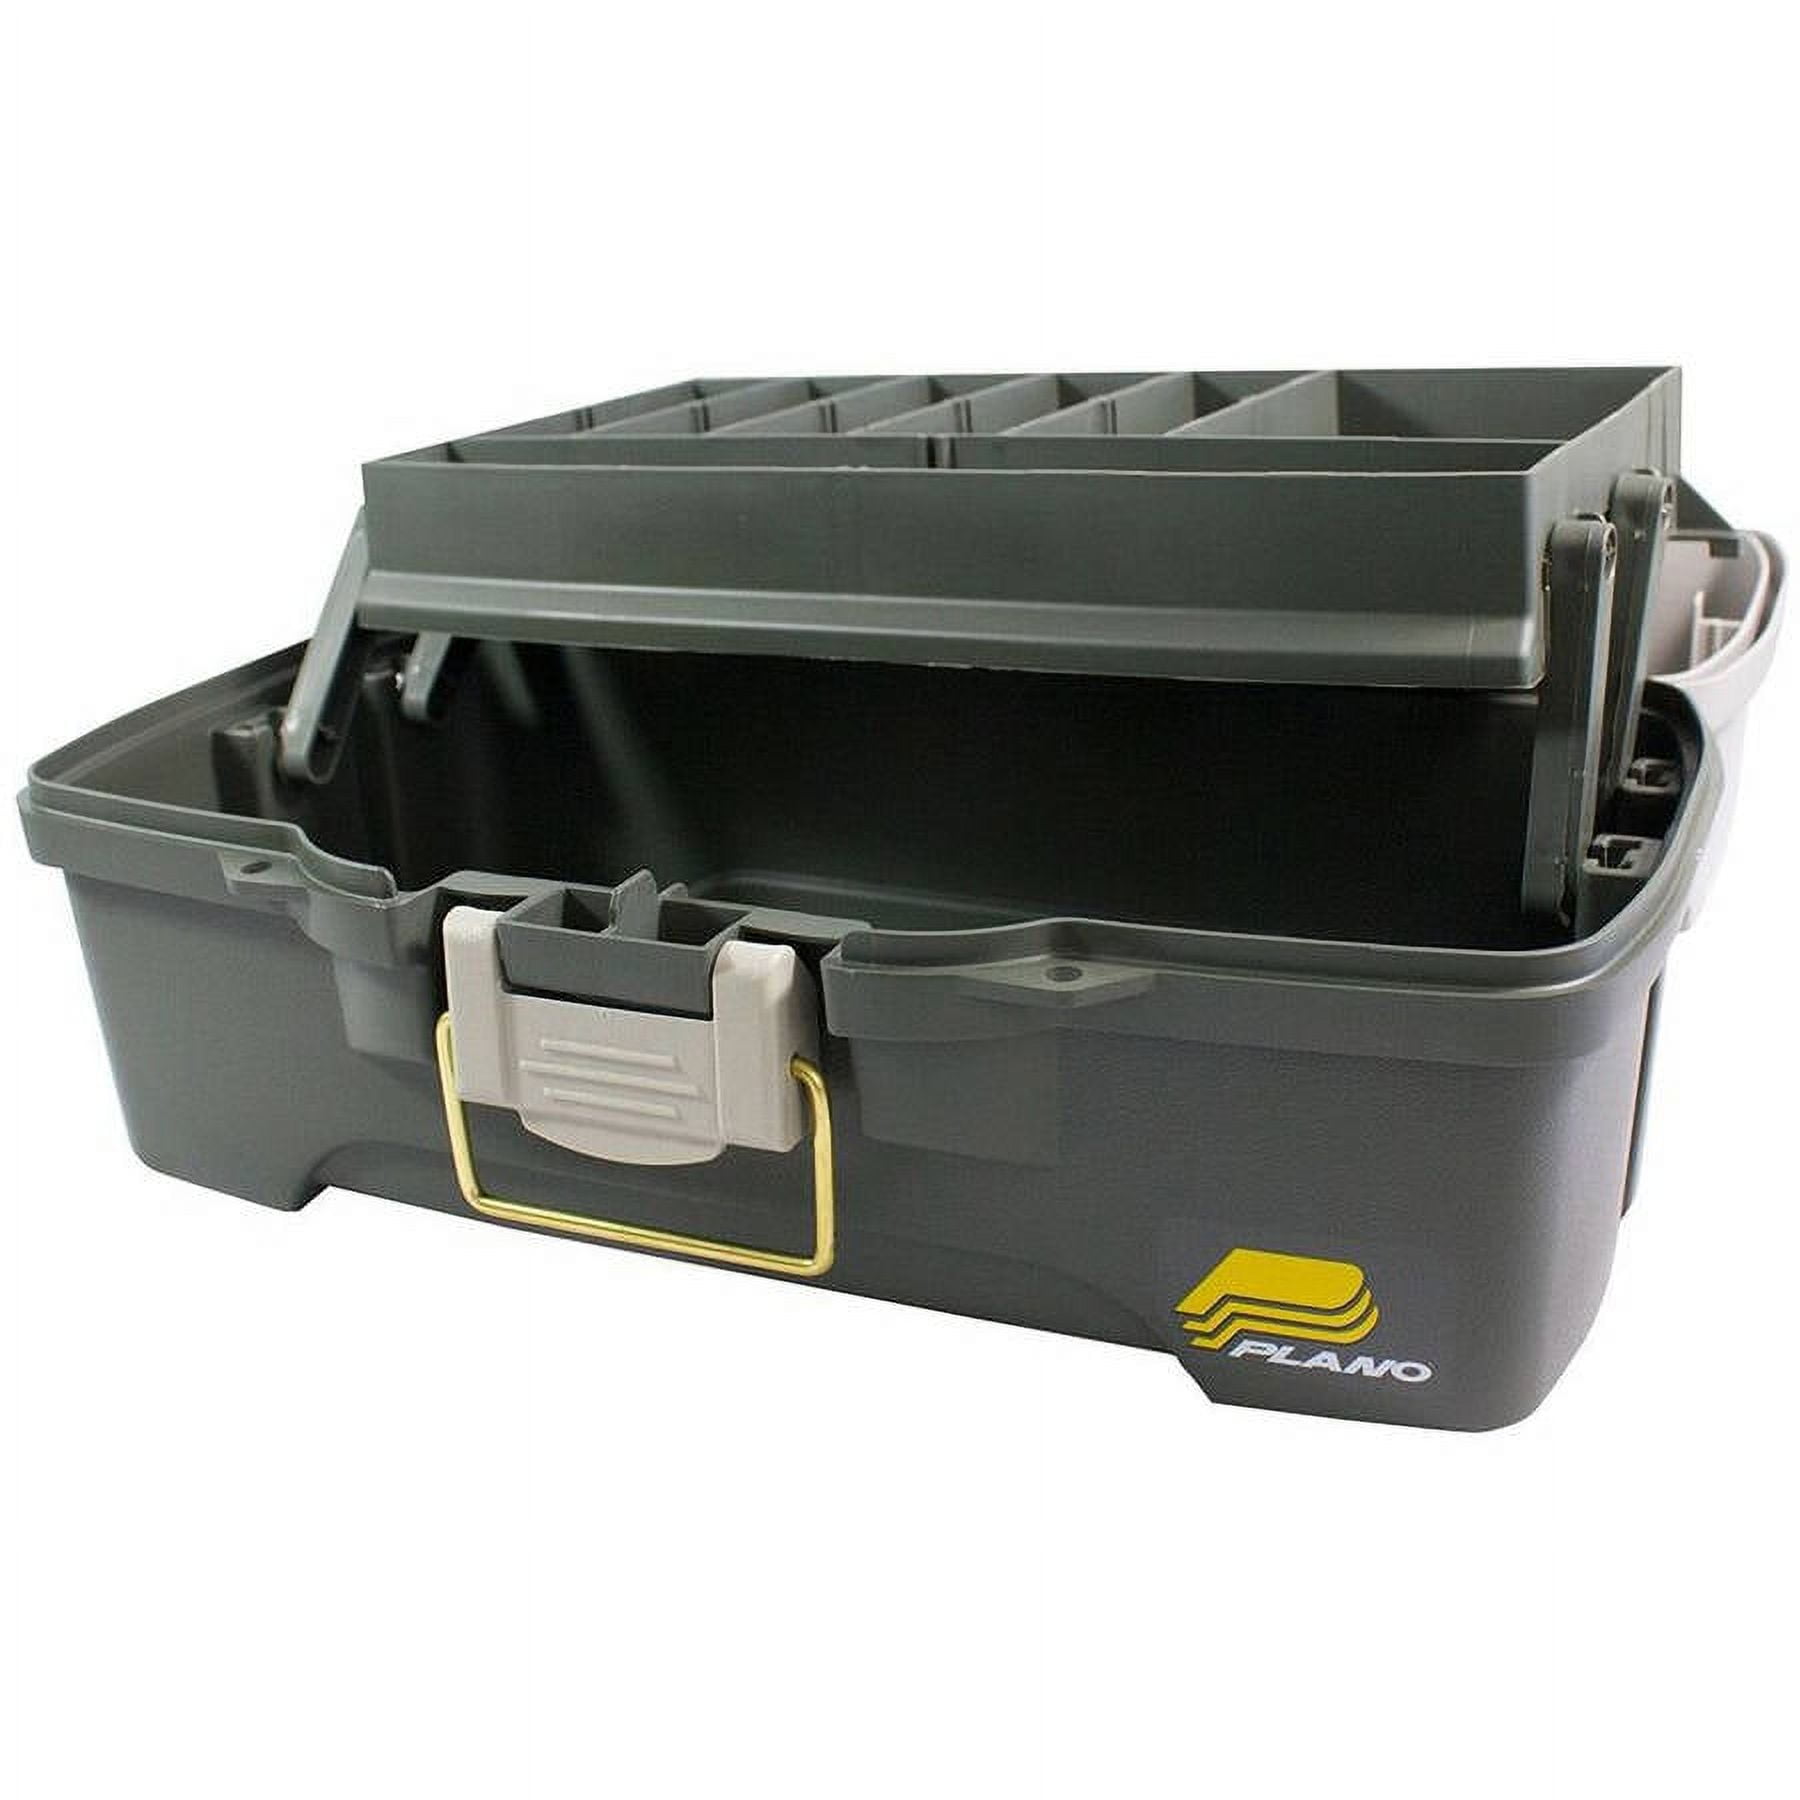 Plano 6201 One-Tray Tackle Box, Bait Storage, Extending